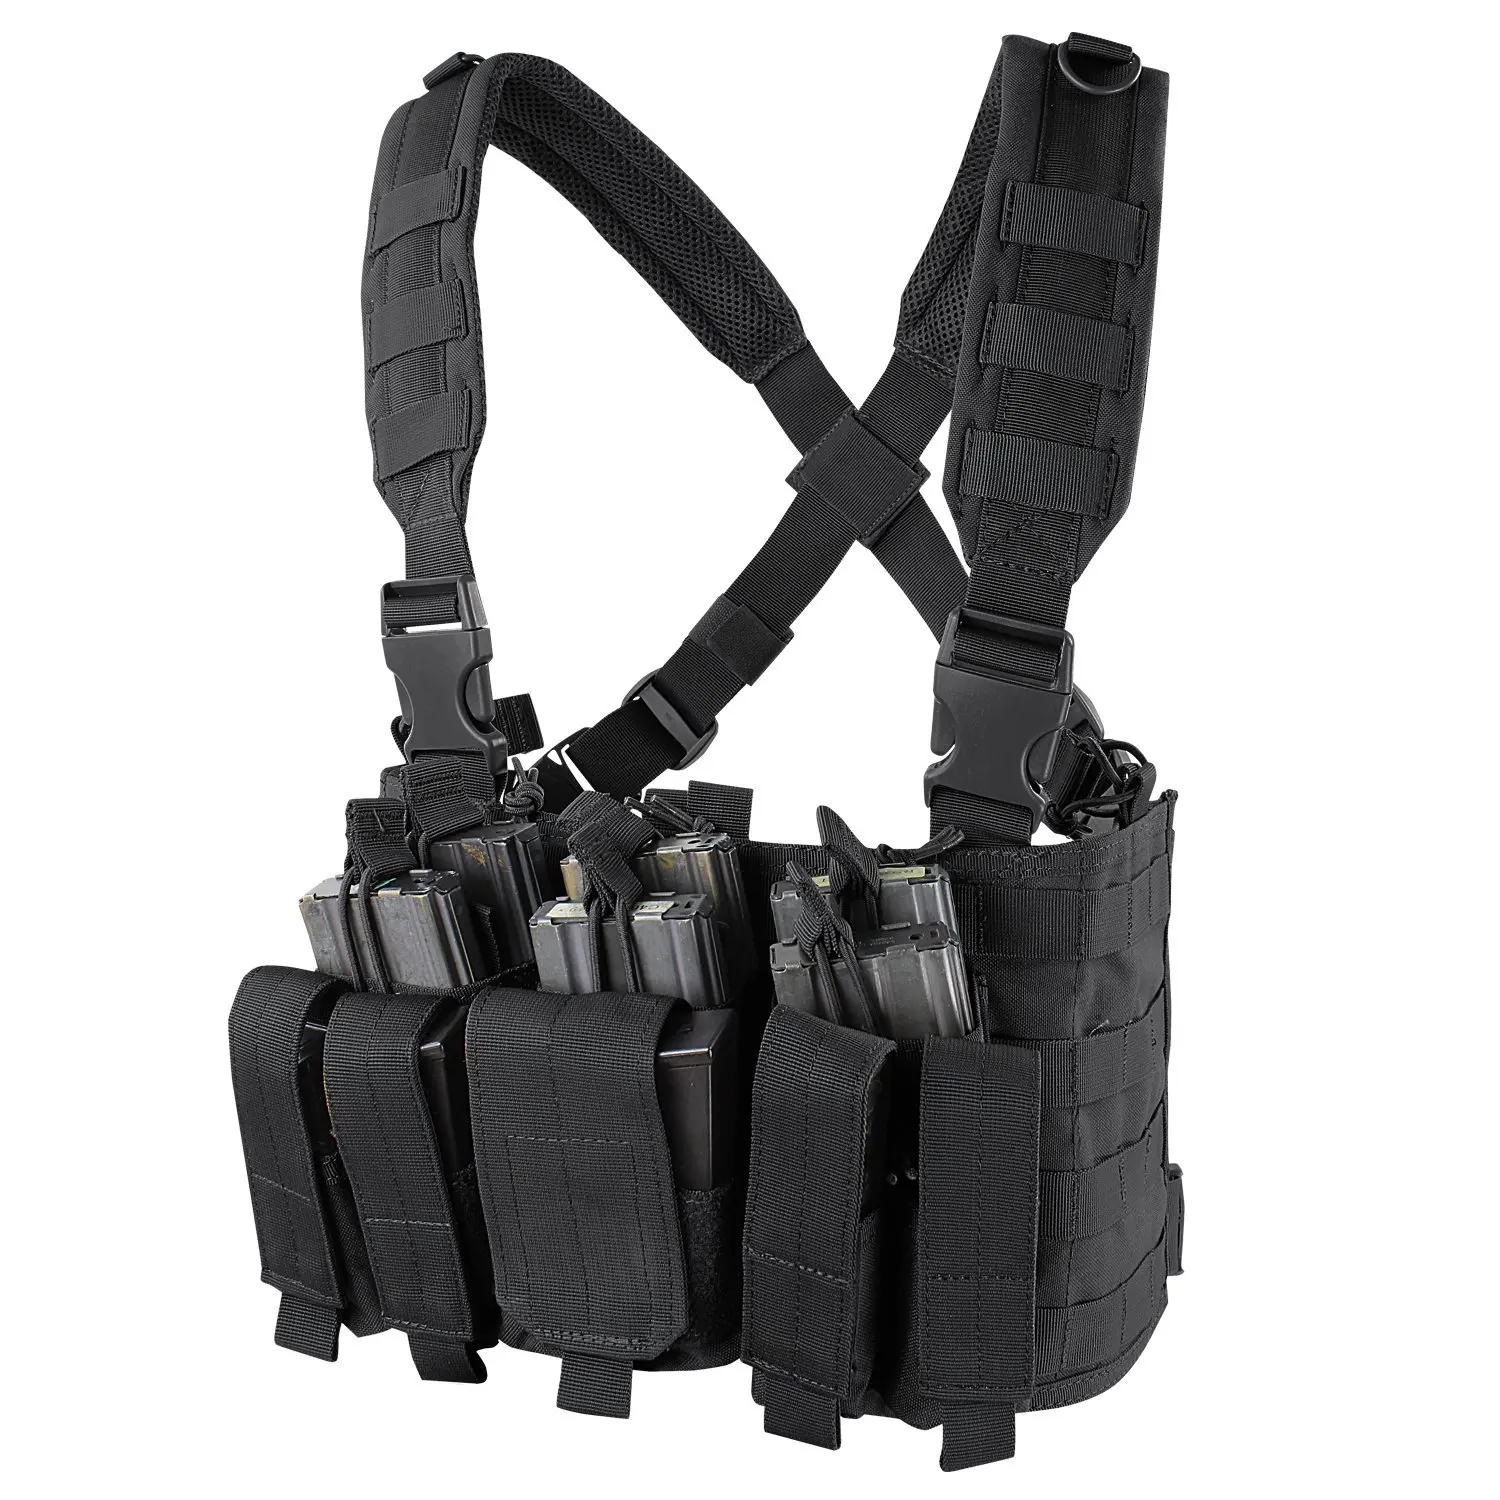 High Quality Military Tactical Hunting Chest Rig With Molle Webbing ...